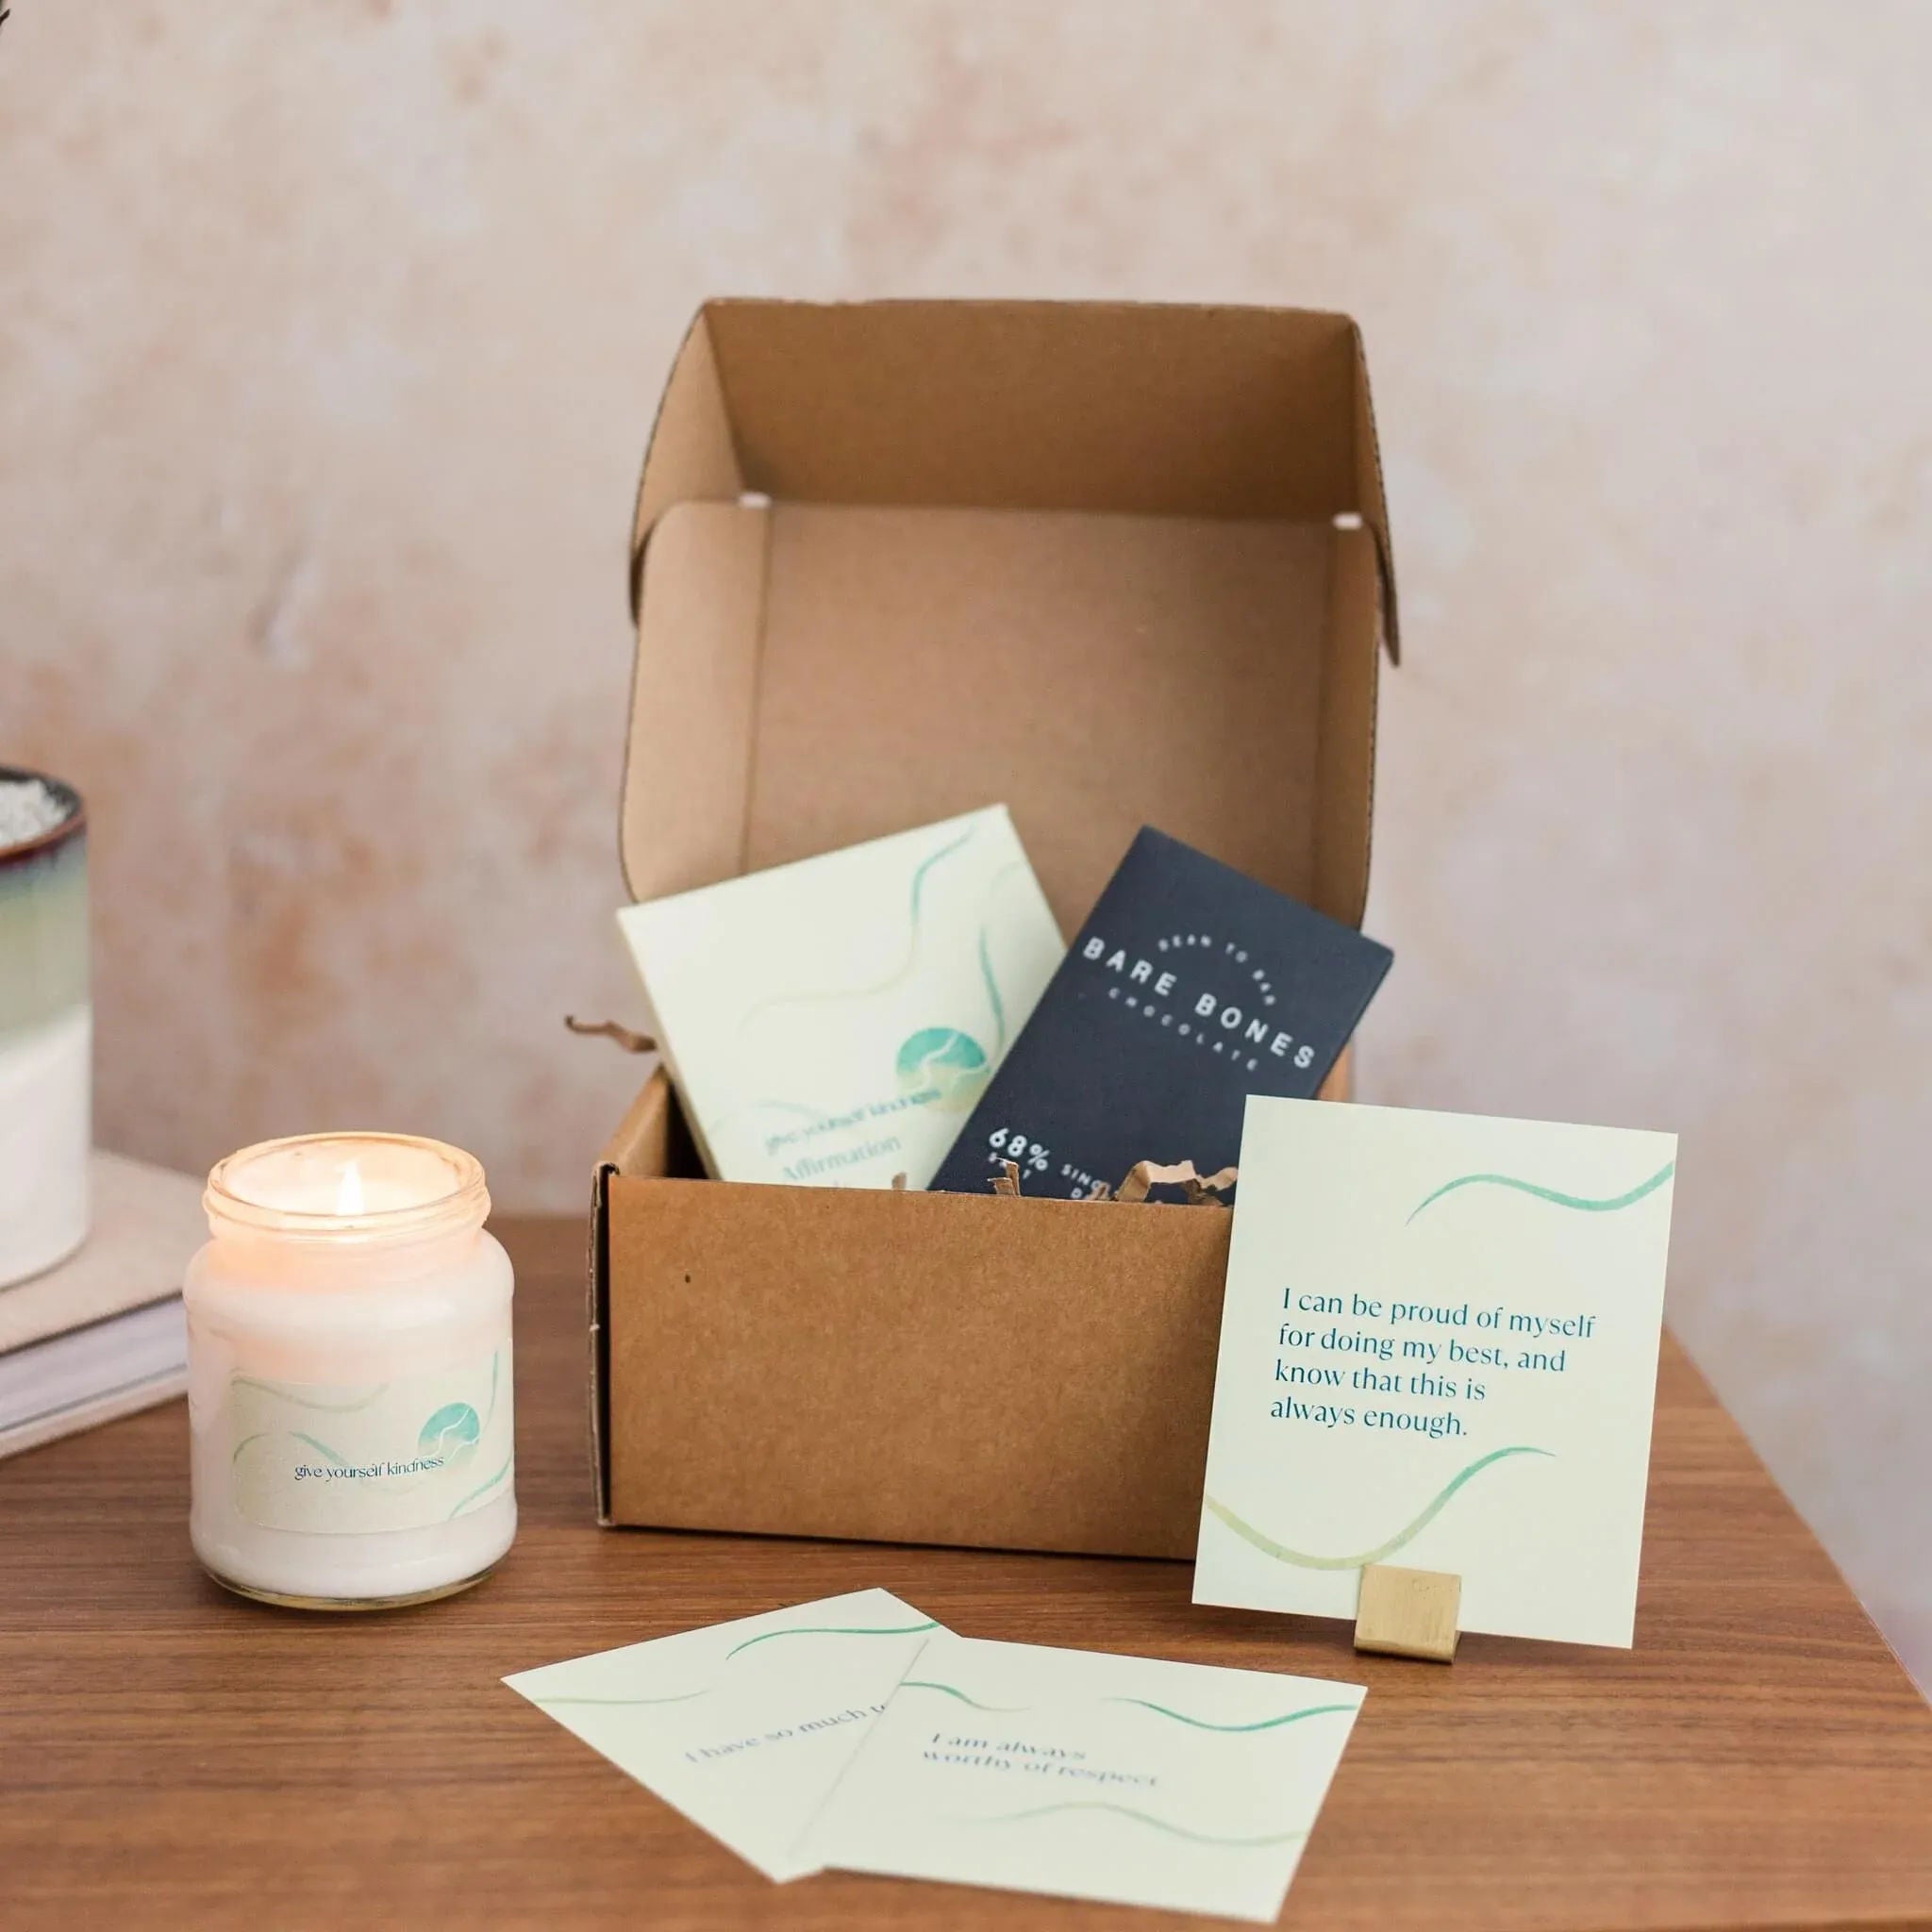 The Affirmation Gift Box